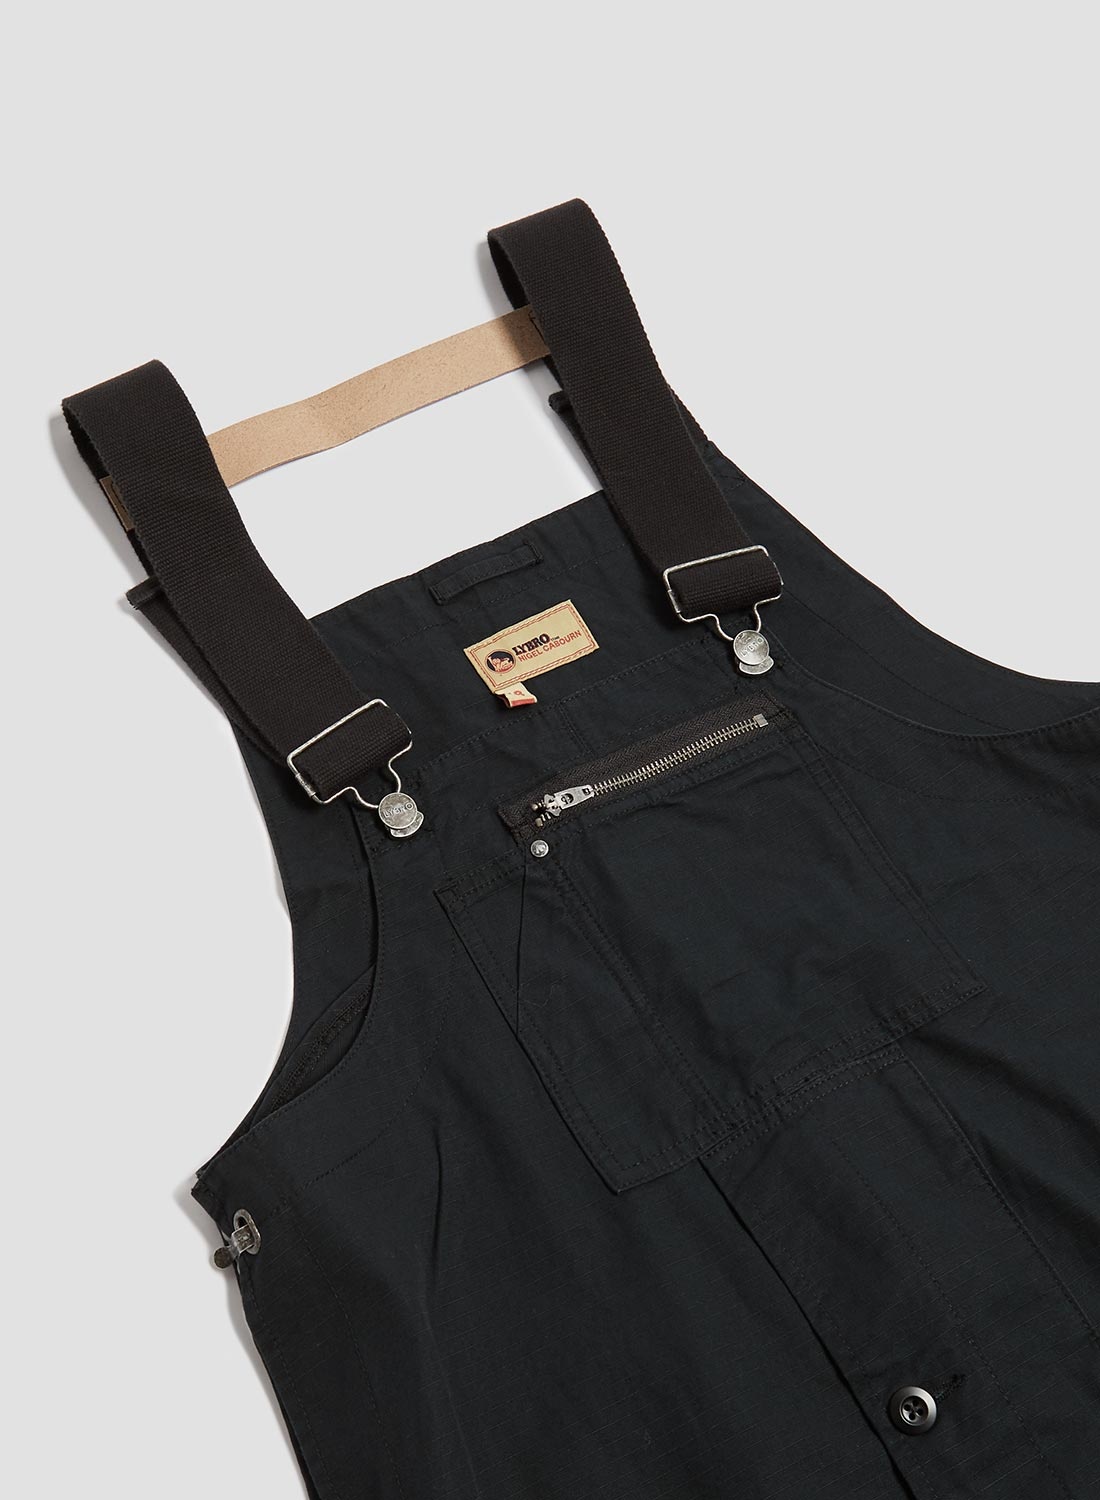 Naval Dungaree in Black (Cotton Ripstop) - 6